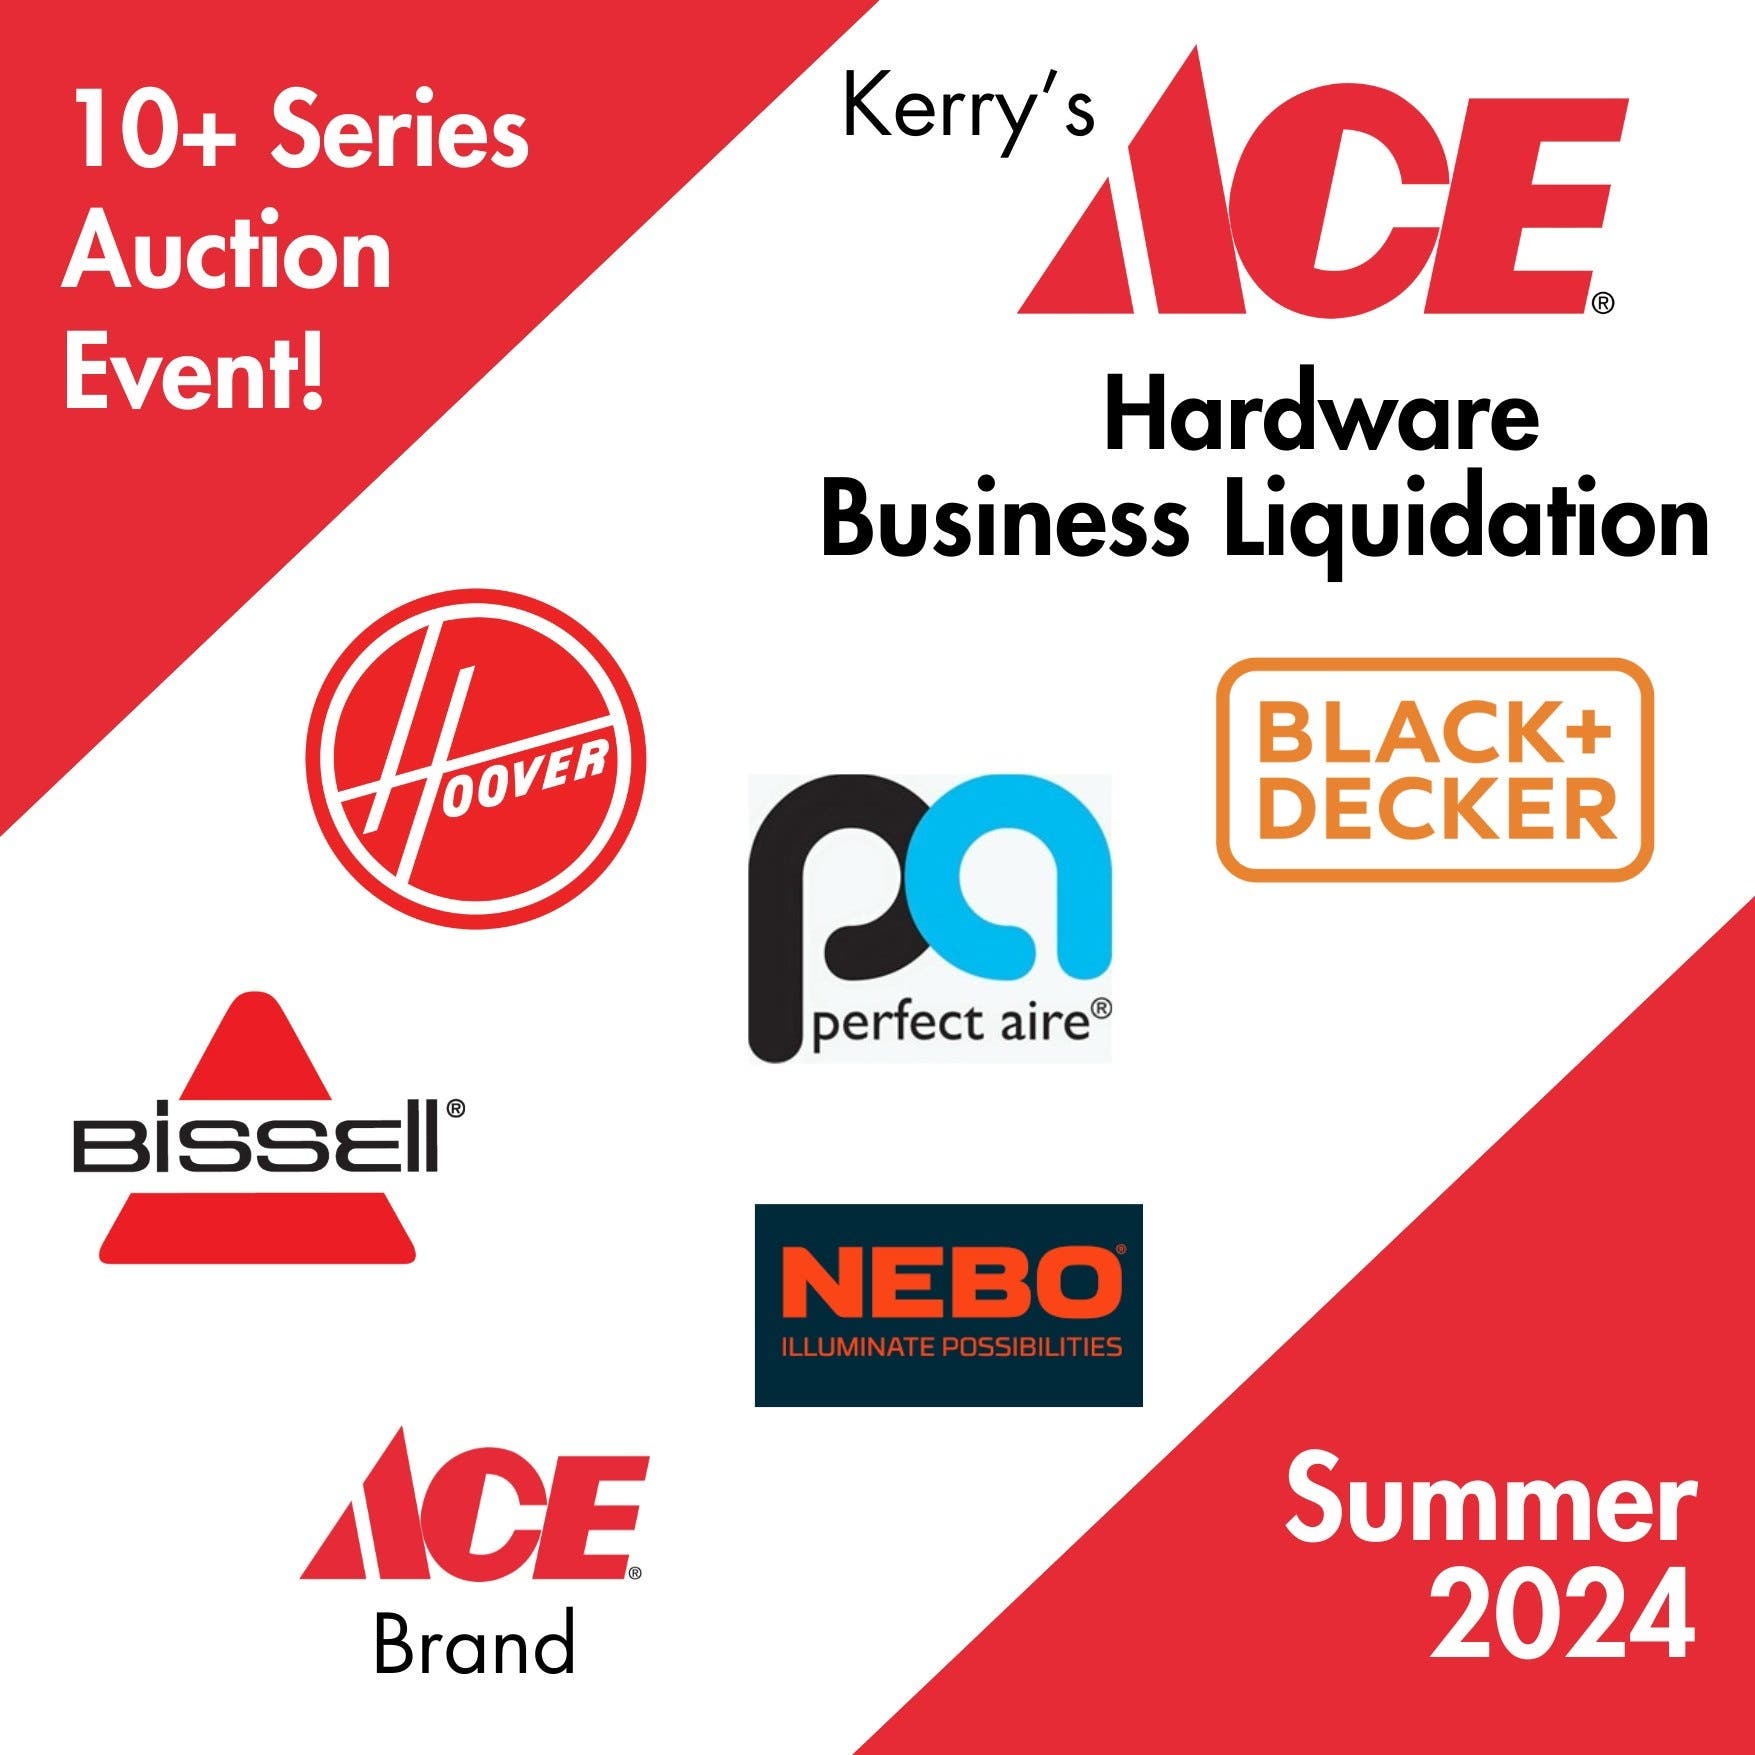 Housewares | Brand New In Box | Kerry’s Ace Hardware Business Liquidation